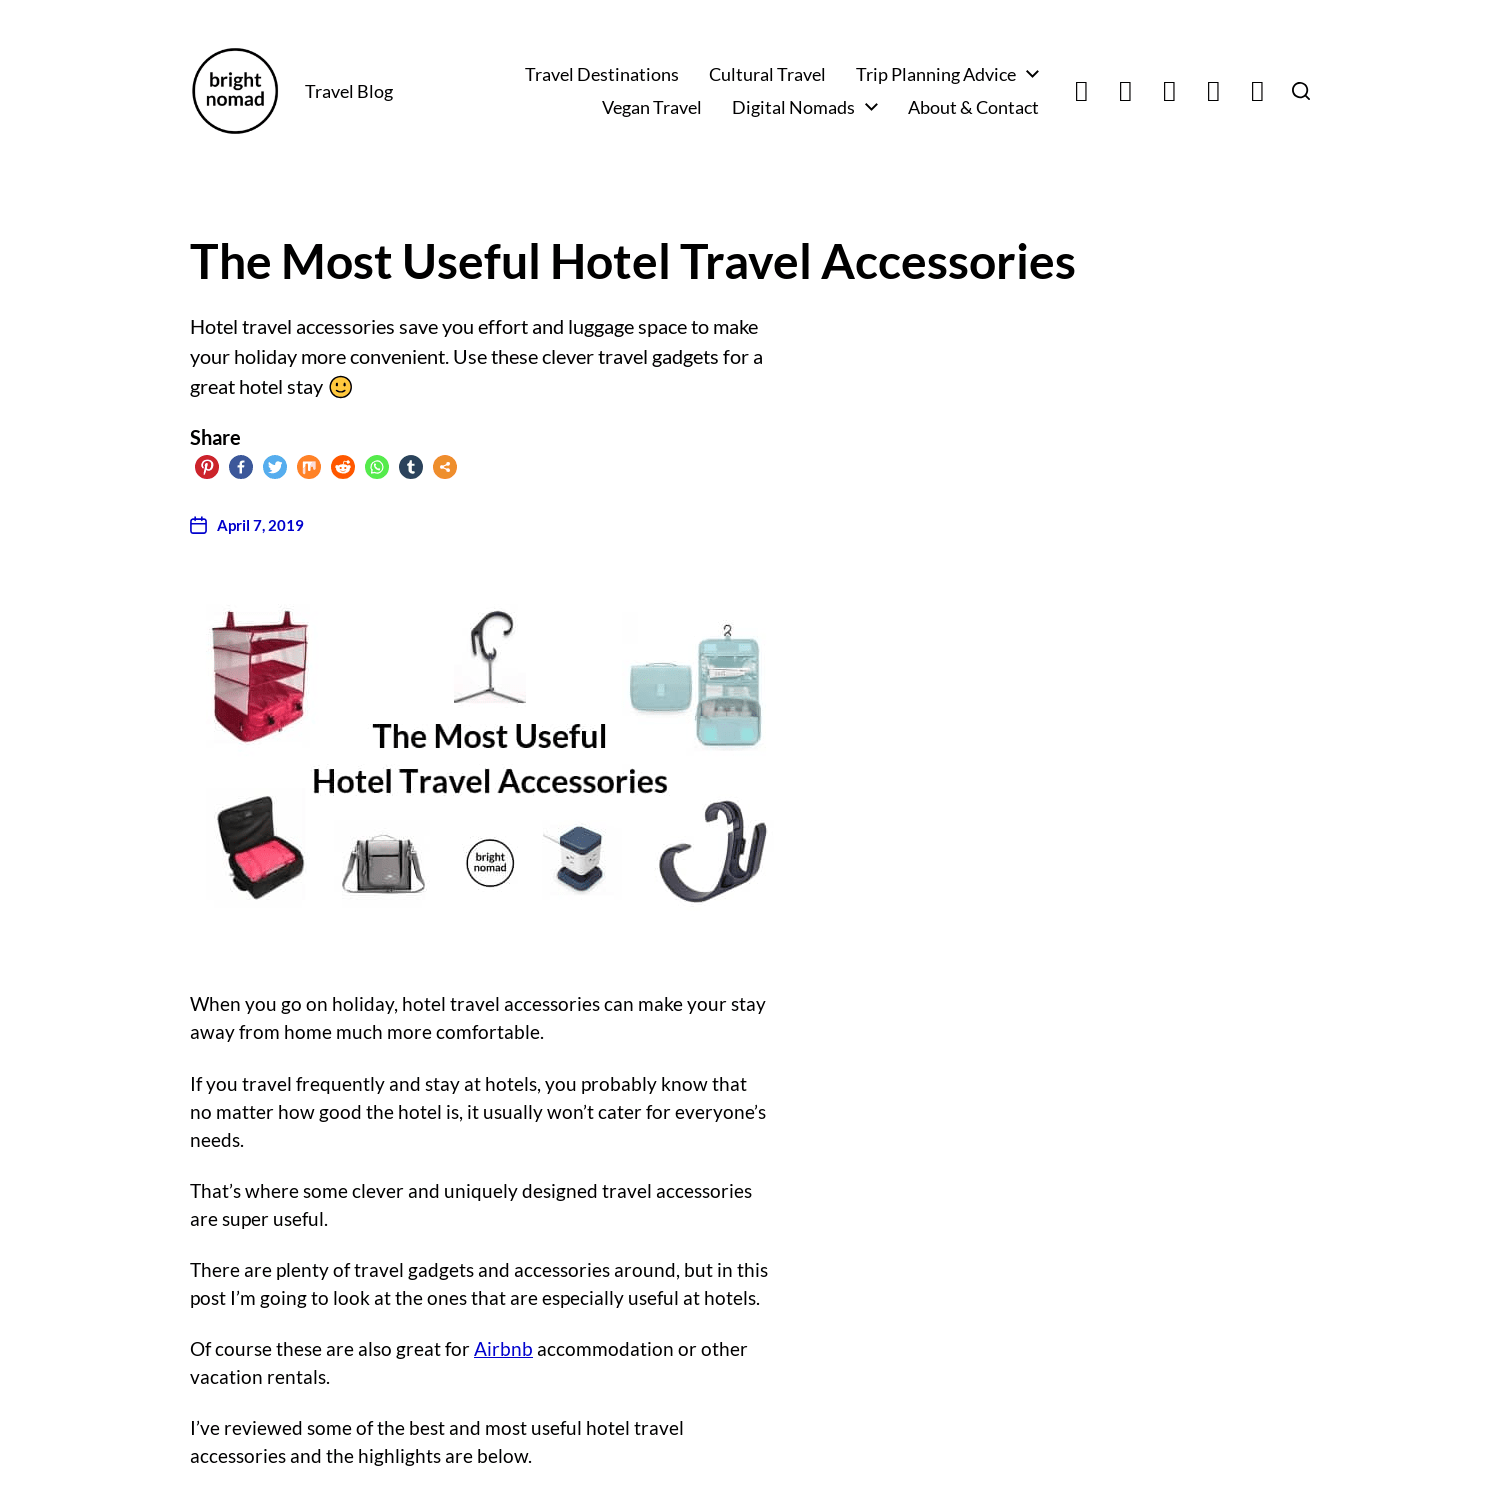 The Most Useful Hotel Travel Accessories and Gadgets